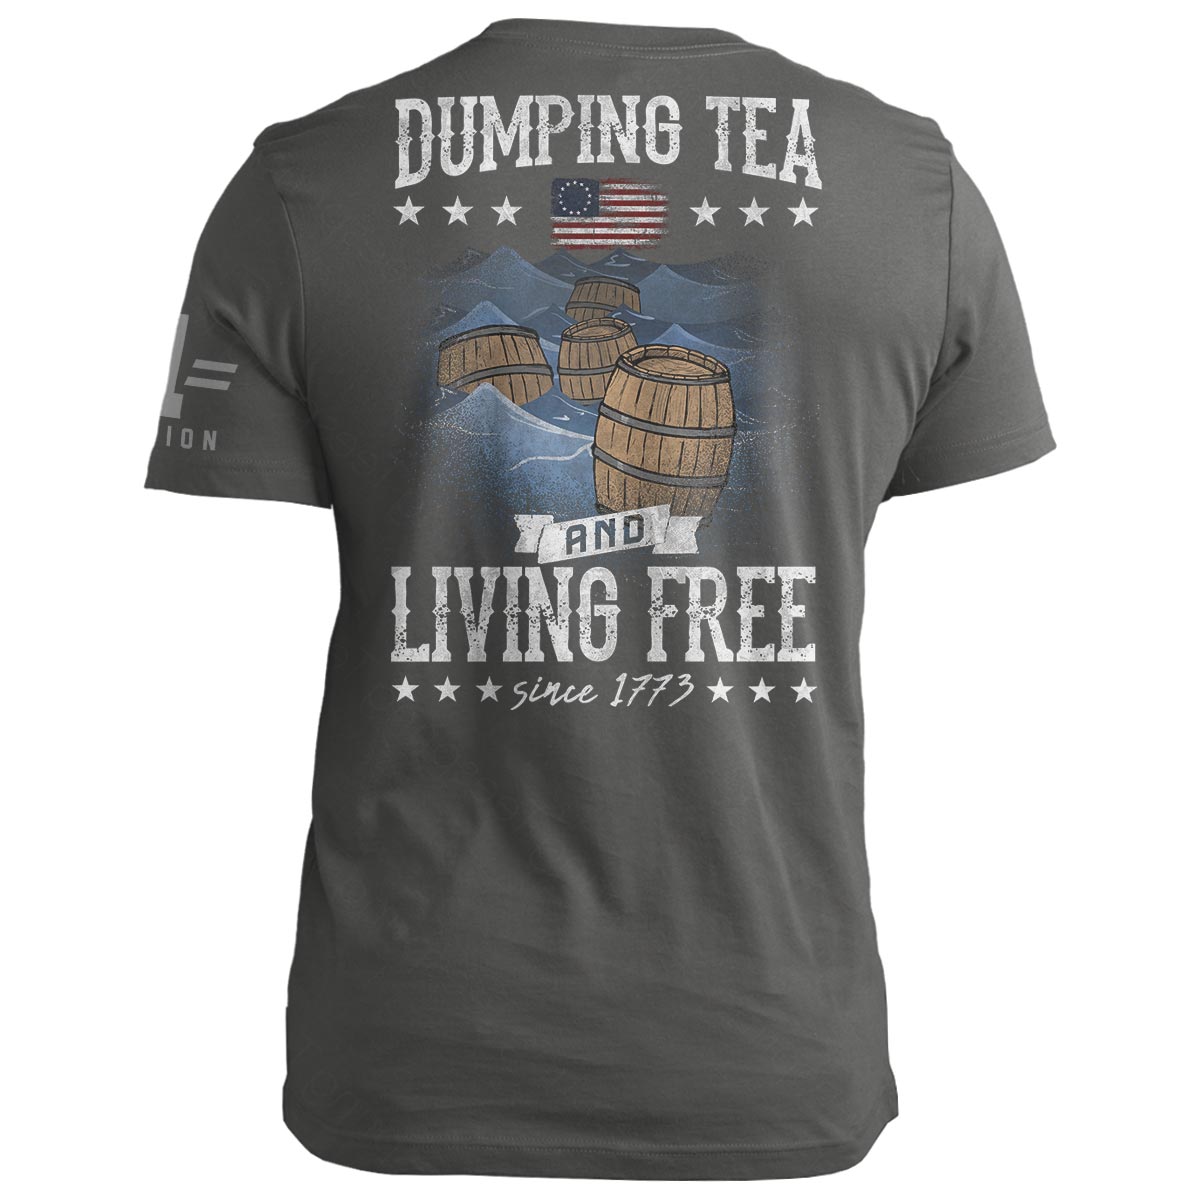 Dumping Tea and Living Free